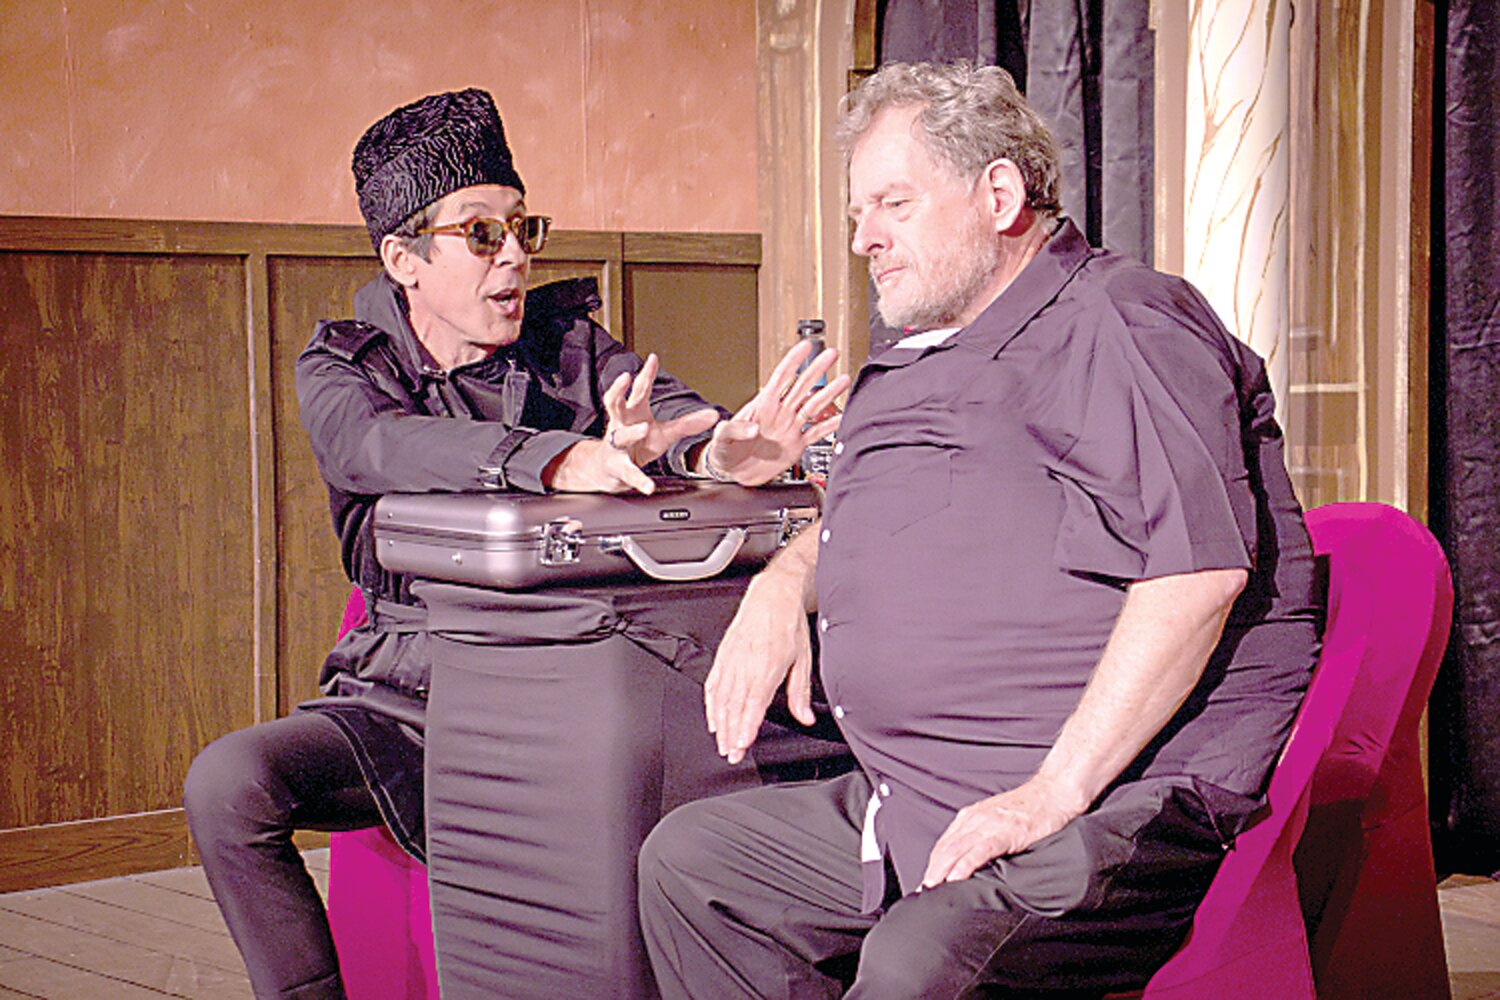 Joseph Torsella, left, and Rupert Hinton rehearse for the ActorsNET take on “The Merry Wives of Windsor” by William Shakespeare.